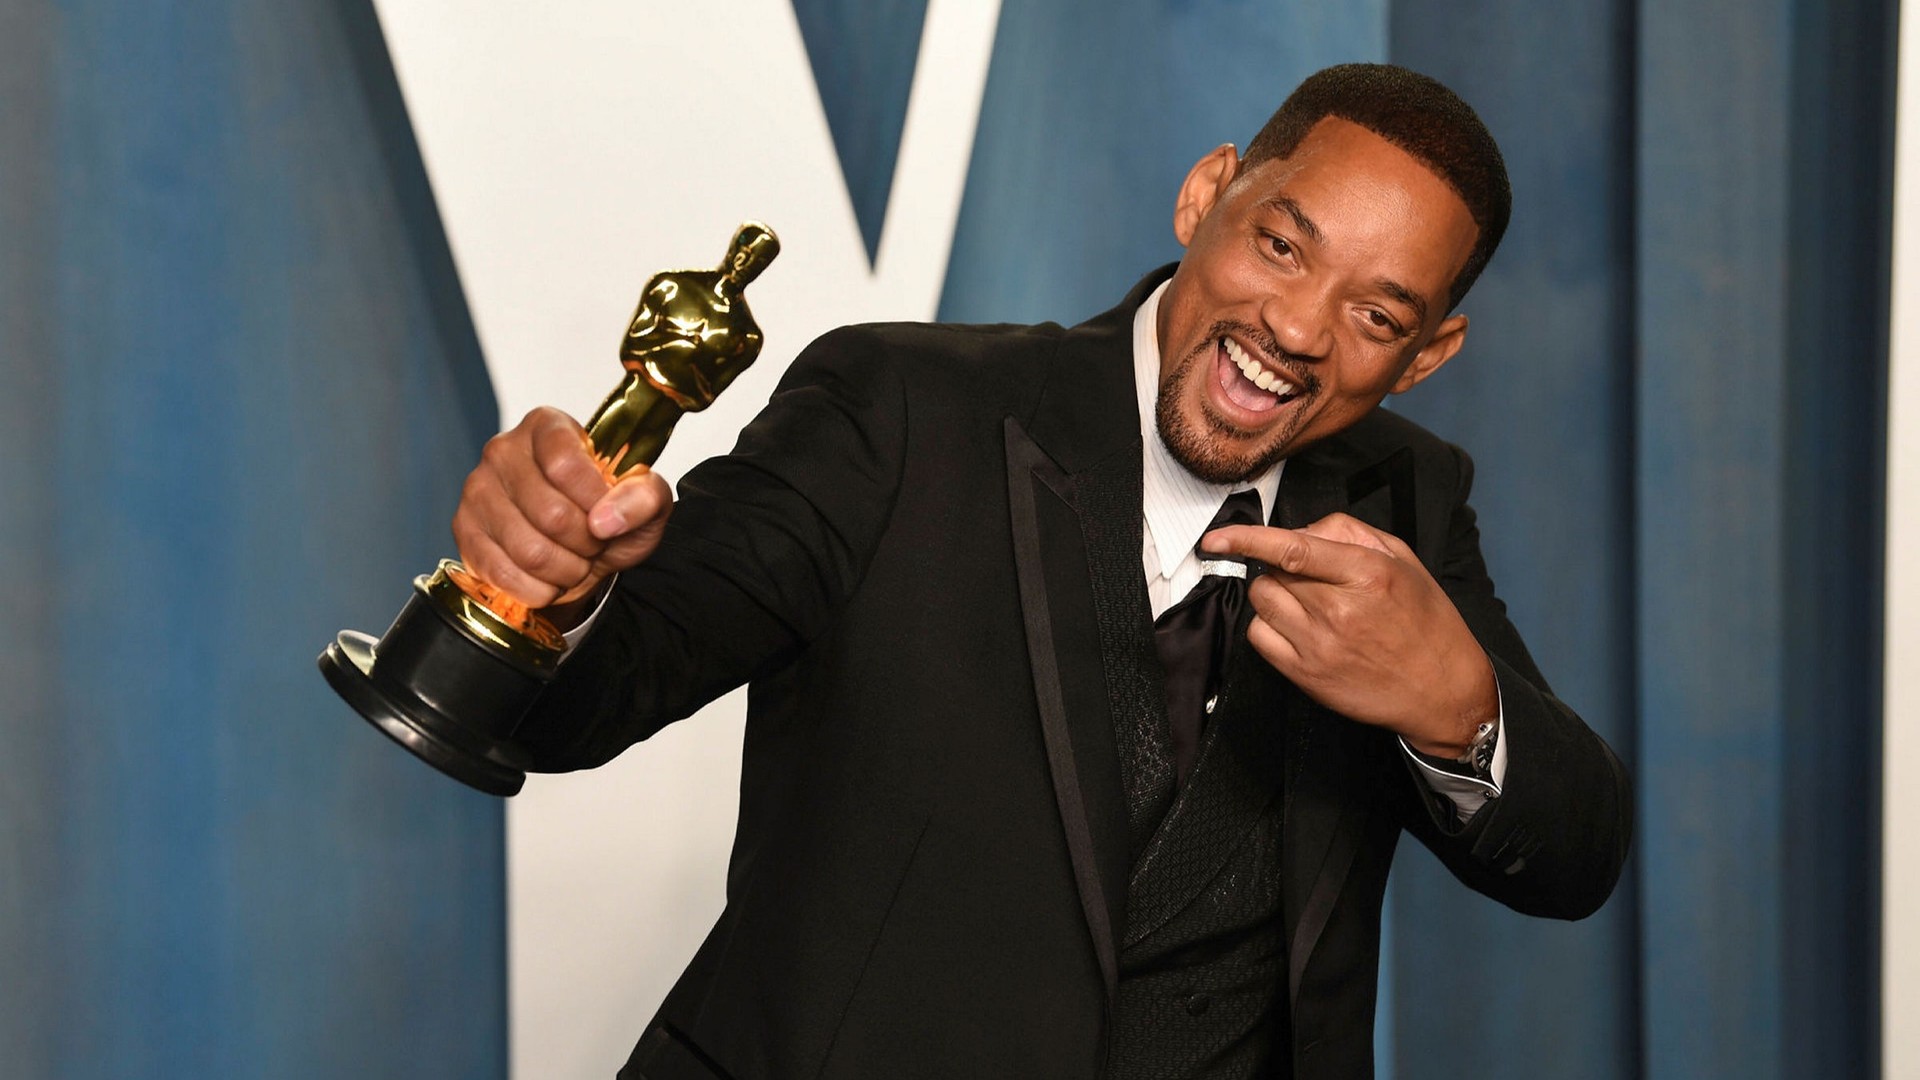 After the slap, the Apple movie with Will Smith will be postponed to 2023